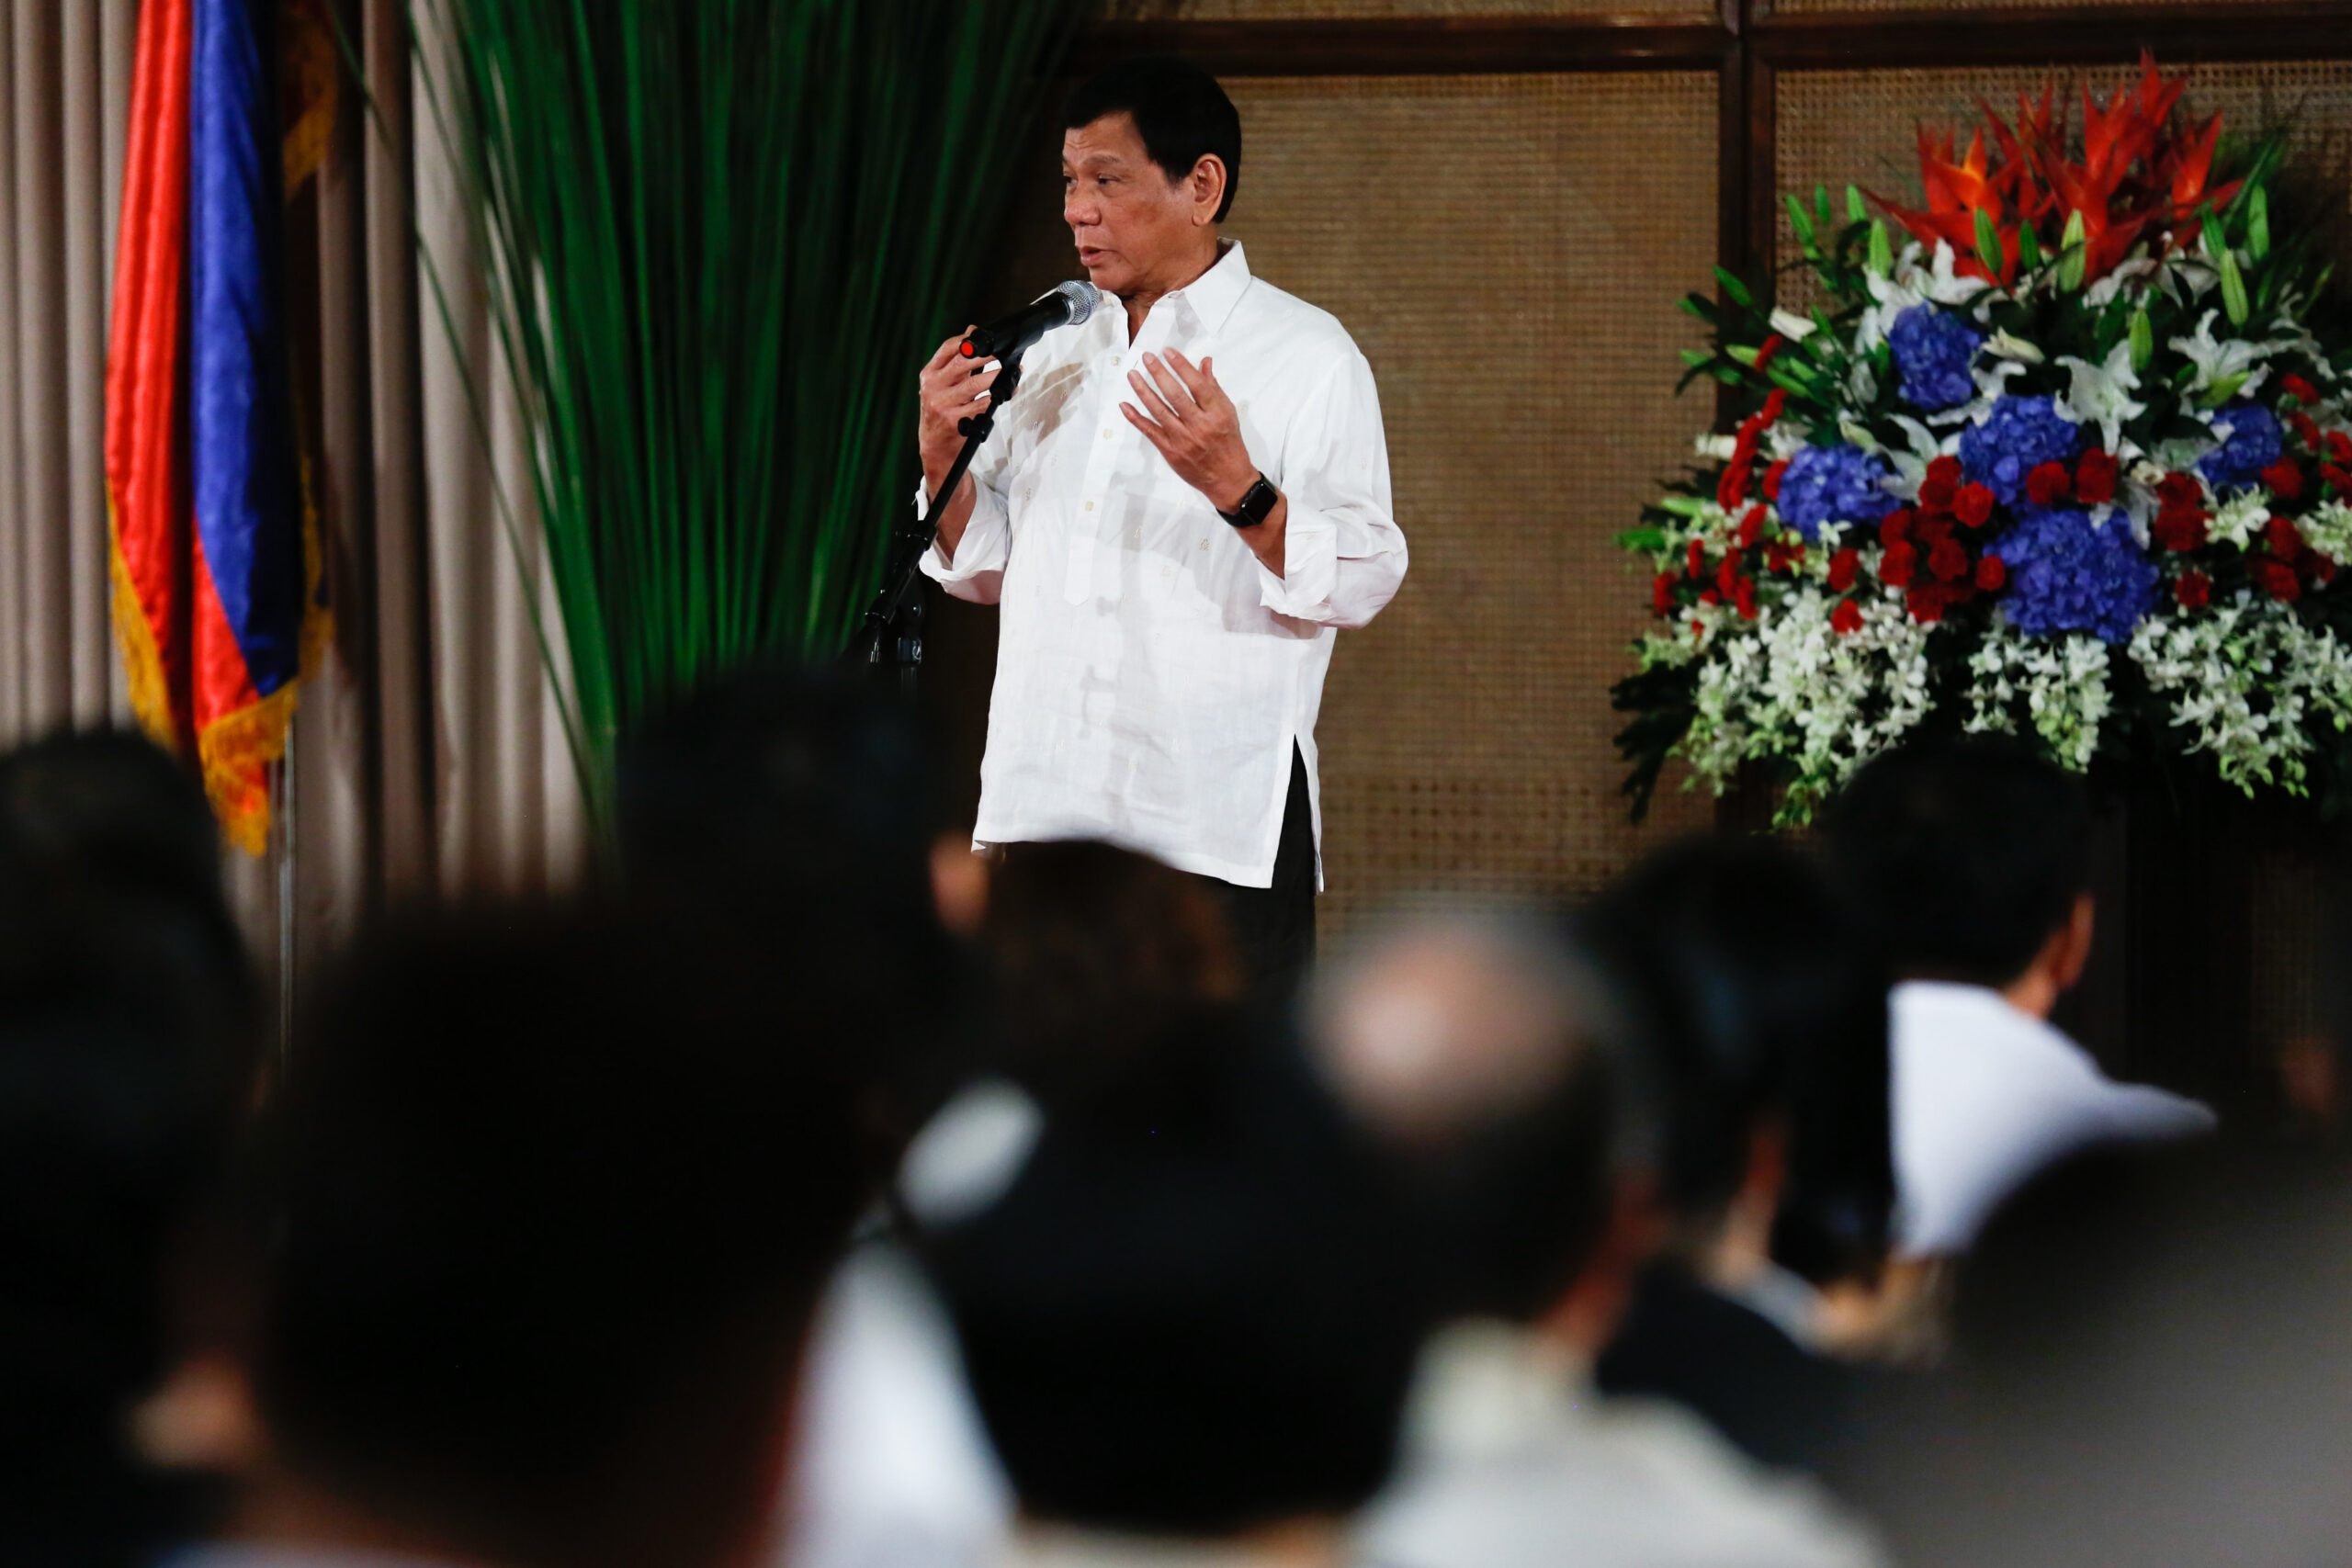 Duterte on his first 50 days: ‘I’m trying my very best’